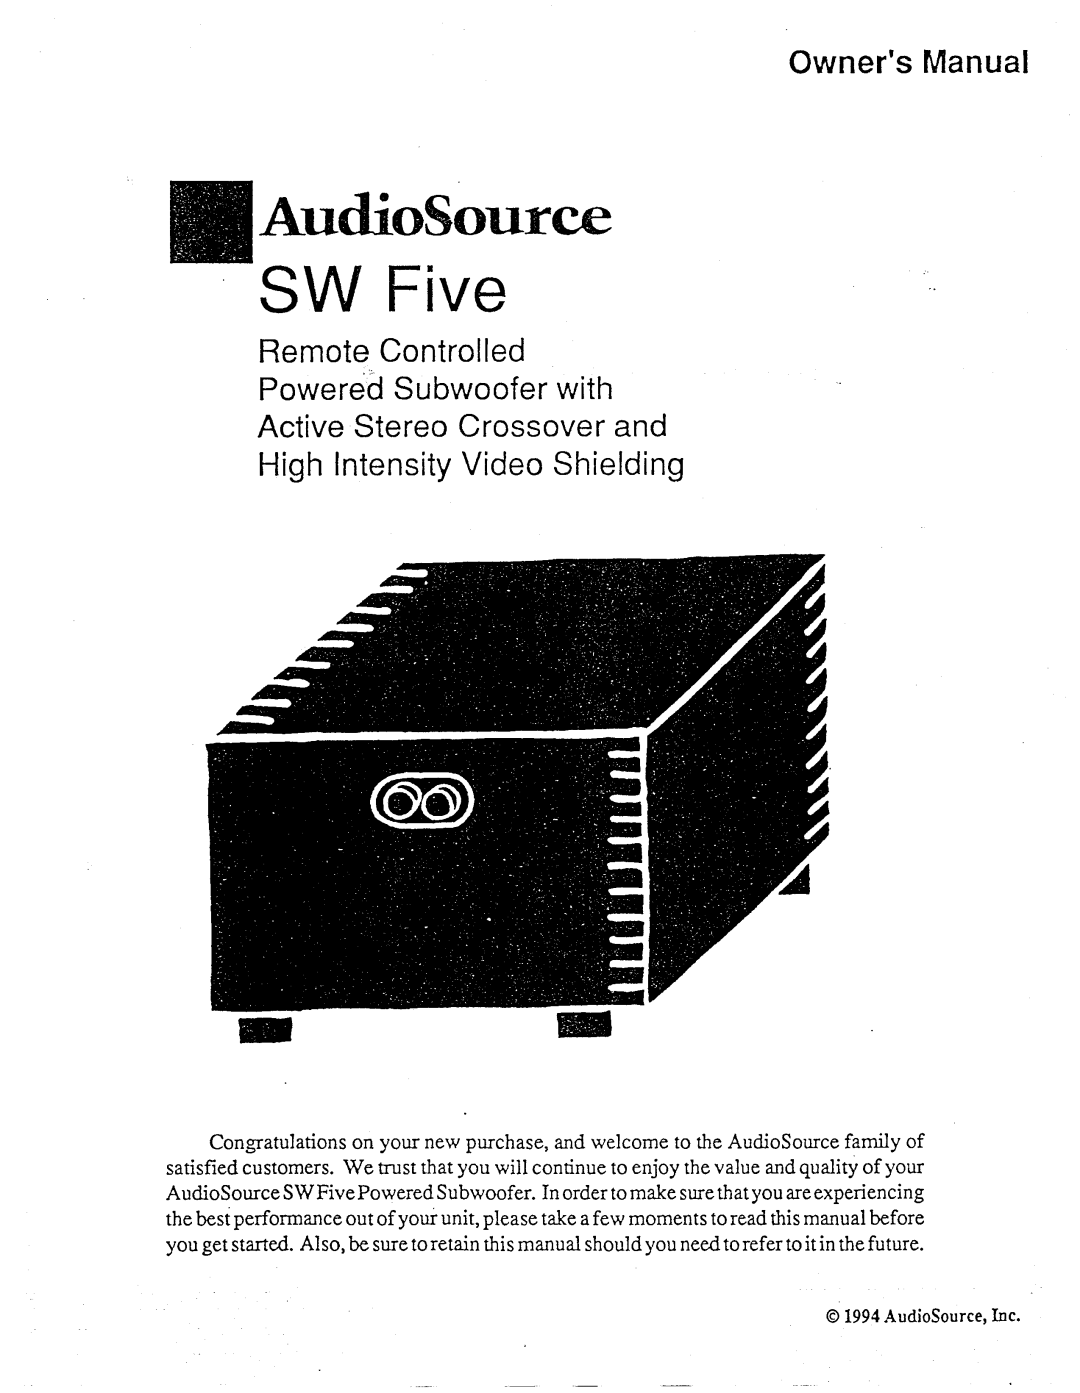 AudioSource Powered Subwoofer with Active Stereo Crossover and High Intensity Video Shielding, SW Five manual 